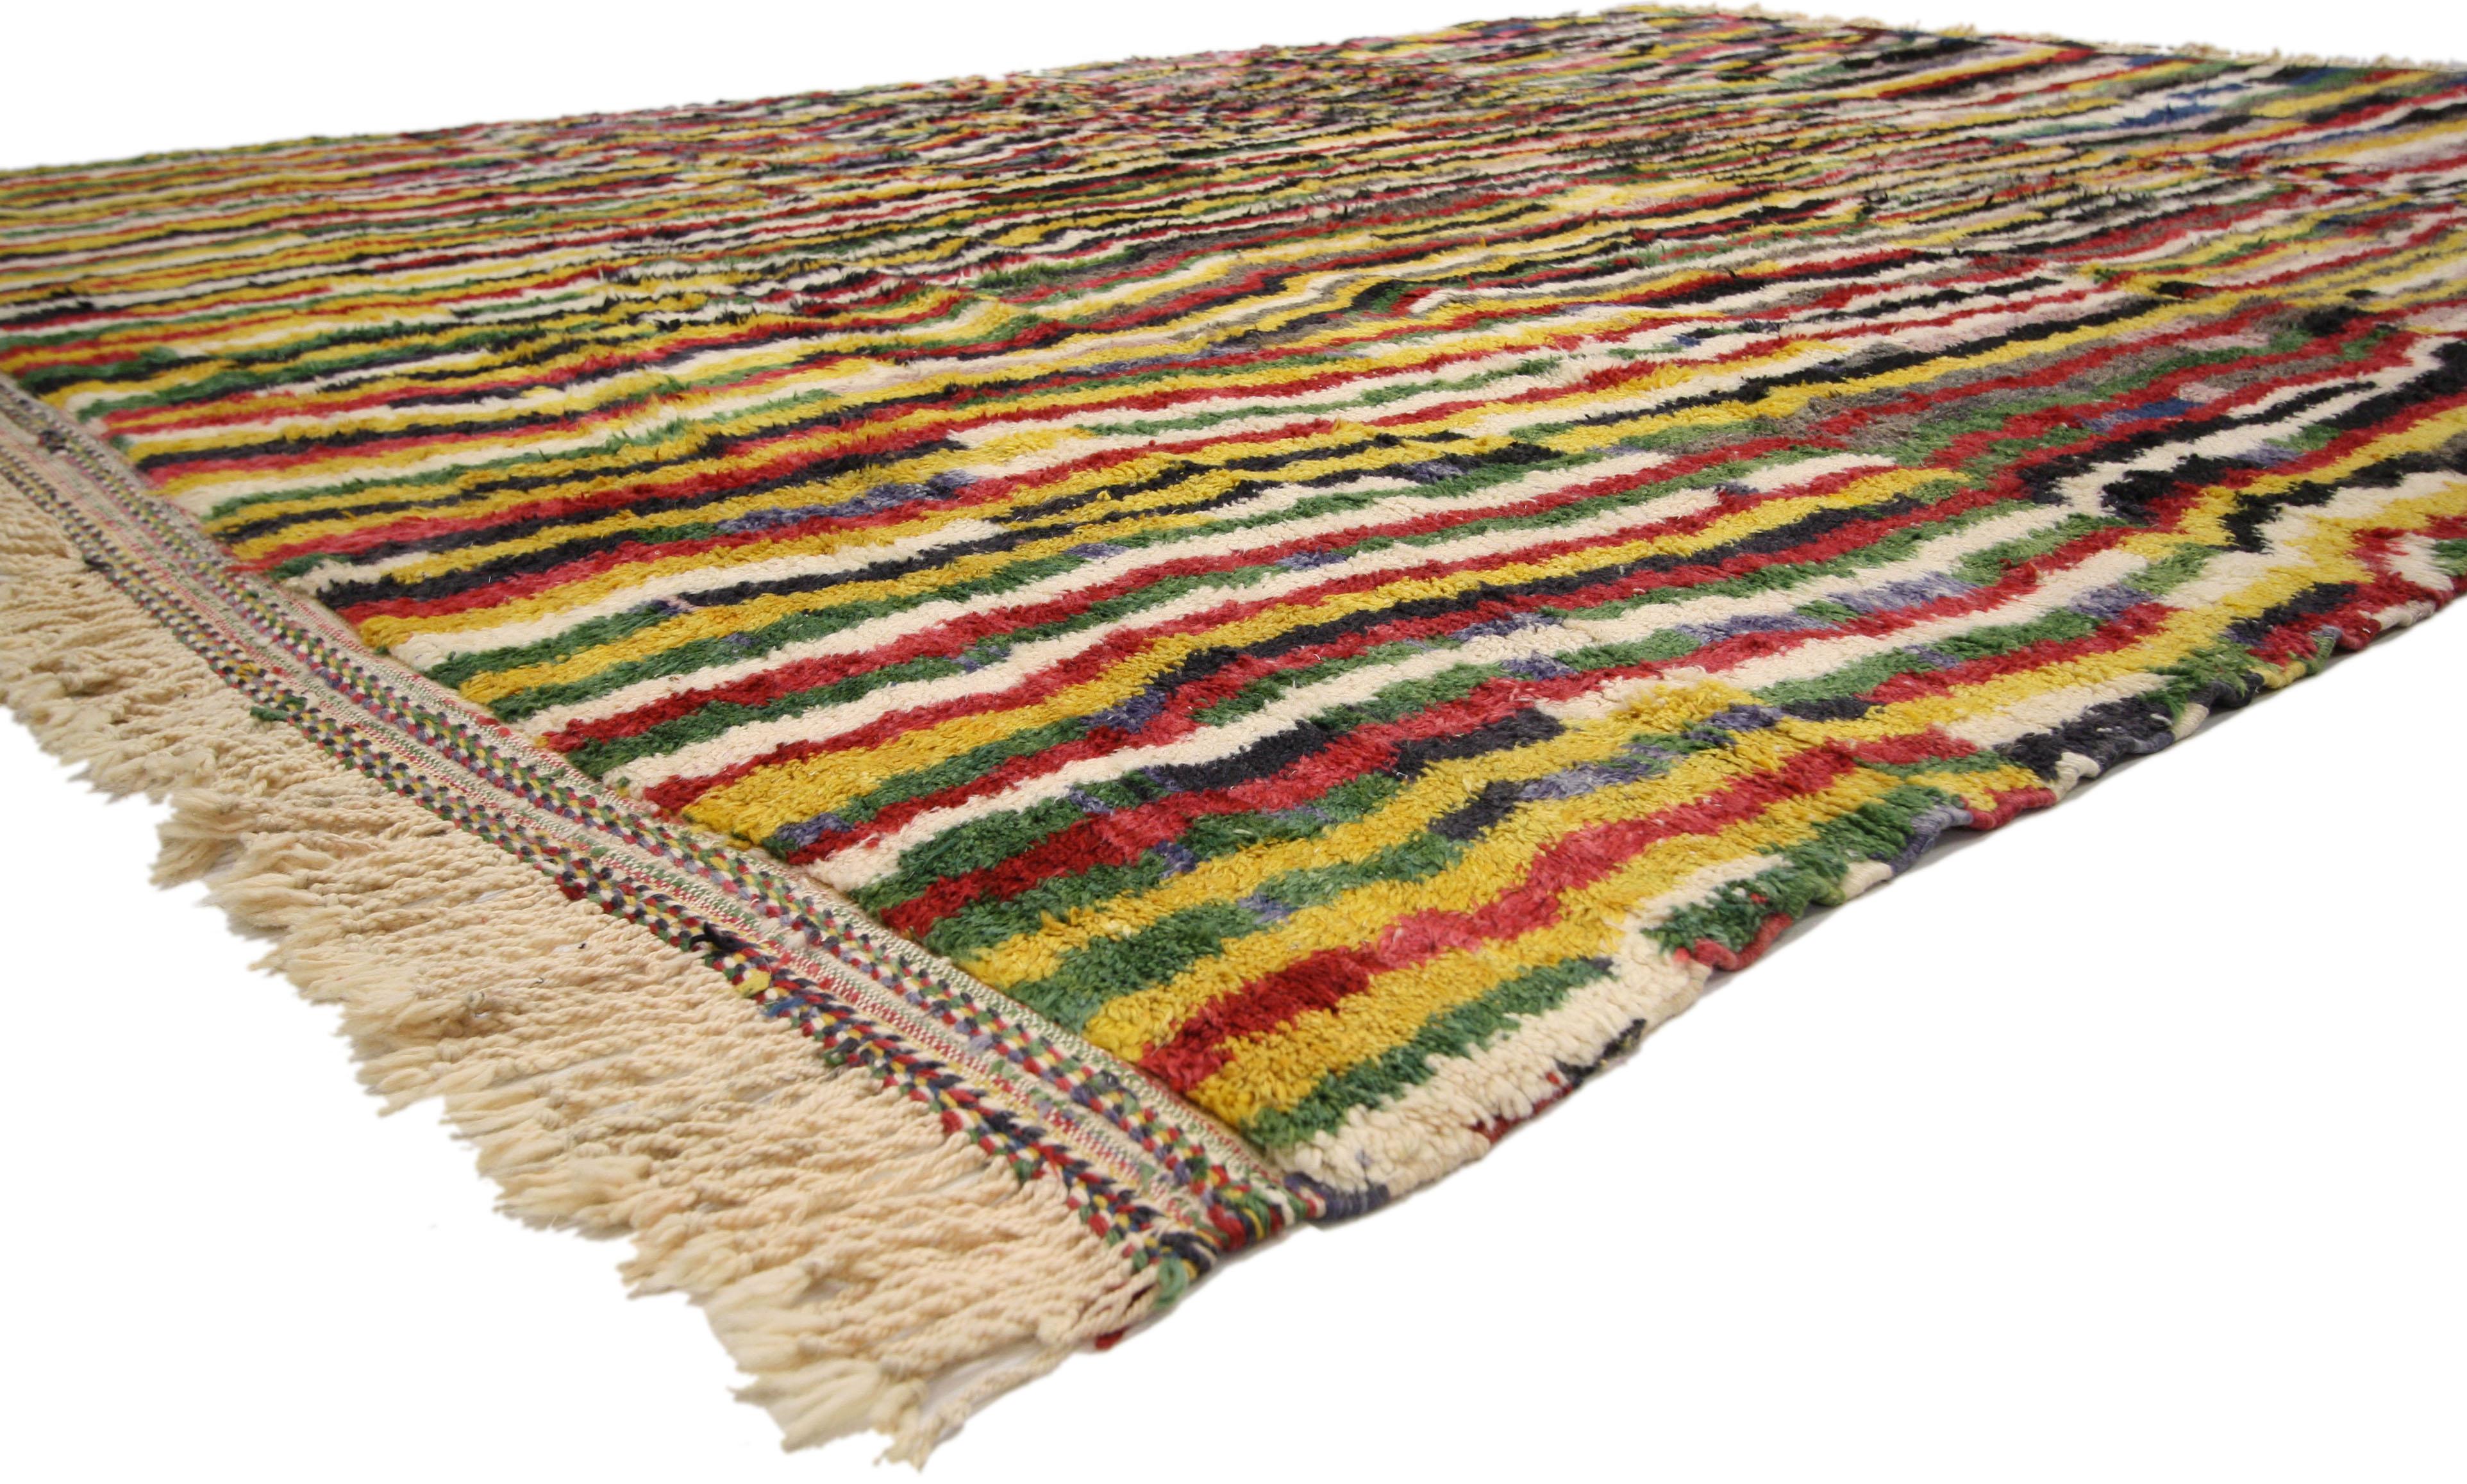 20726 Colorful Moroccan Rug With Bauhaus Style, 09'02 x 12'06. Beni Mrirt rugs epitomize a revered style of traditional Moroccan weaving, renowned for their opulent texture, geometric patterns, and soft, earthy tones. Handcrafted by the skilled